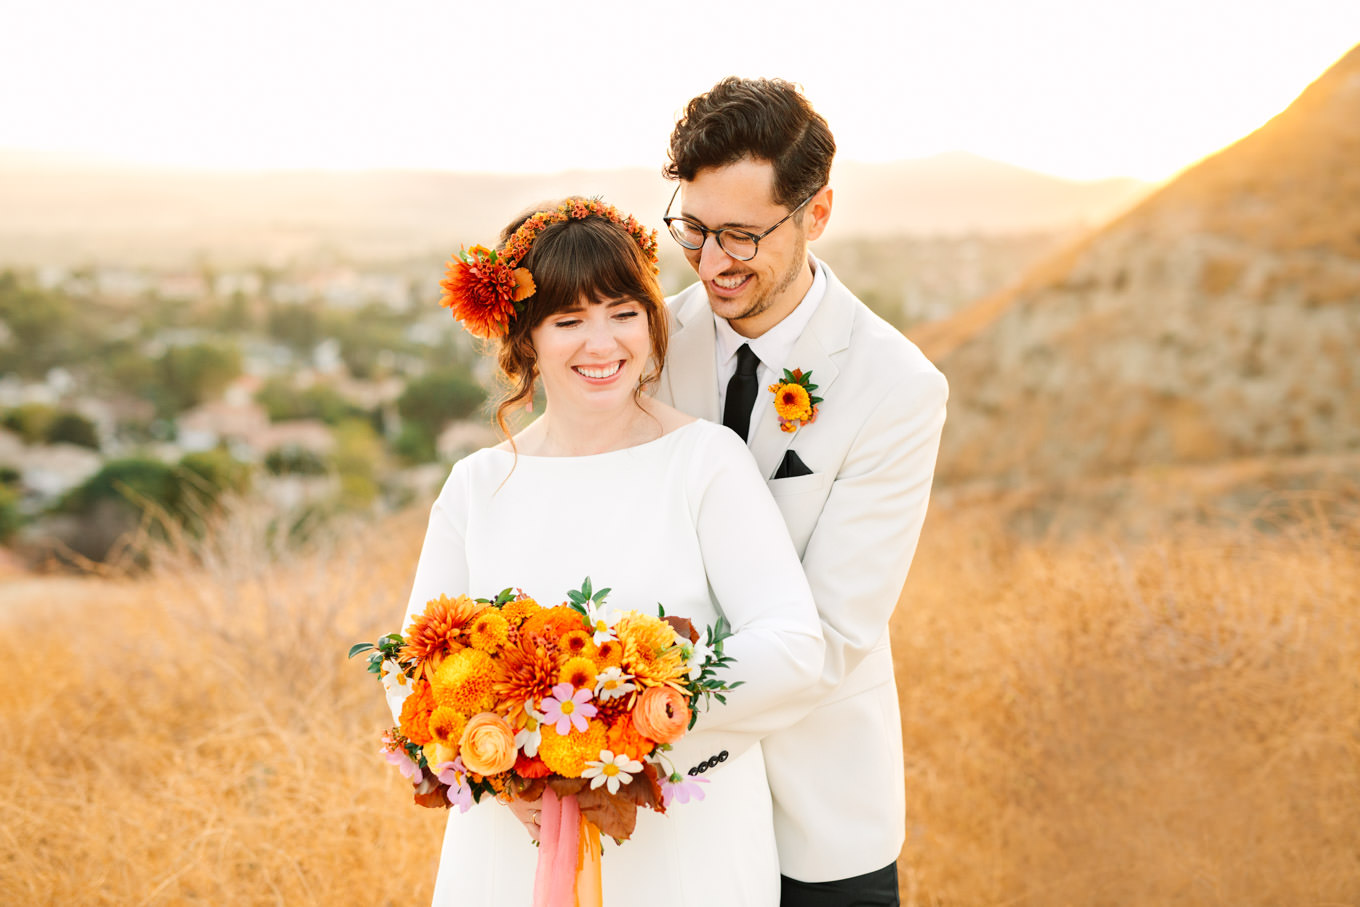 Bride with colorful autumn flowers and groom in cream tux | Engagement, elopement, and wedding photography roundup of Mary Costa’s favorite images from 2020 | Colorful and elevated photography for fun-loving couples in Southern California | #2020wedding #elopement #weddingphoto #weddingphotography #microwedding   Source: Mary Costa Photography | Los Angeles